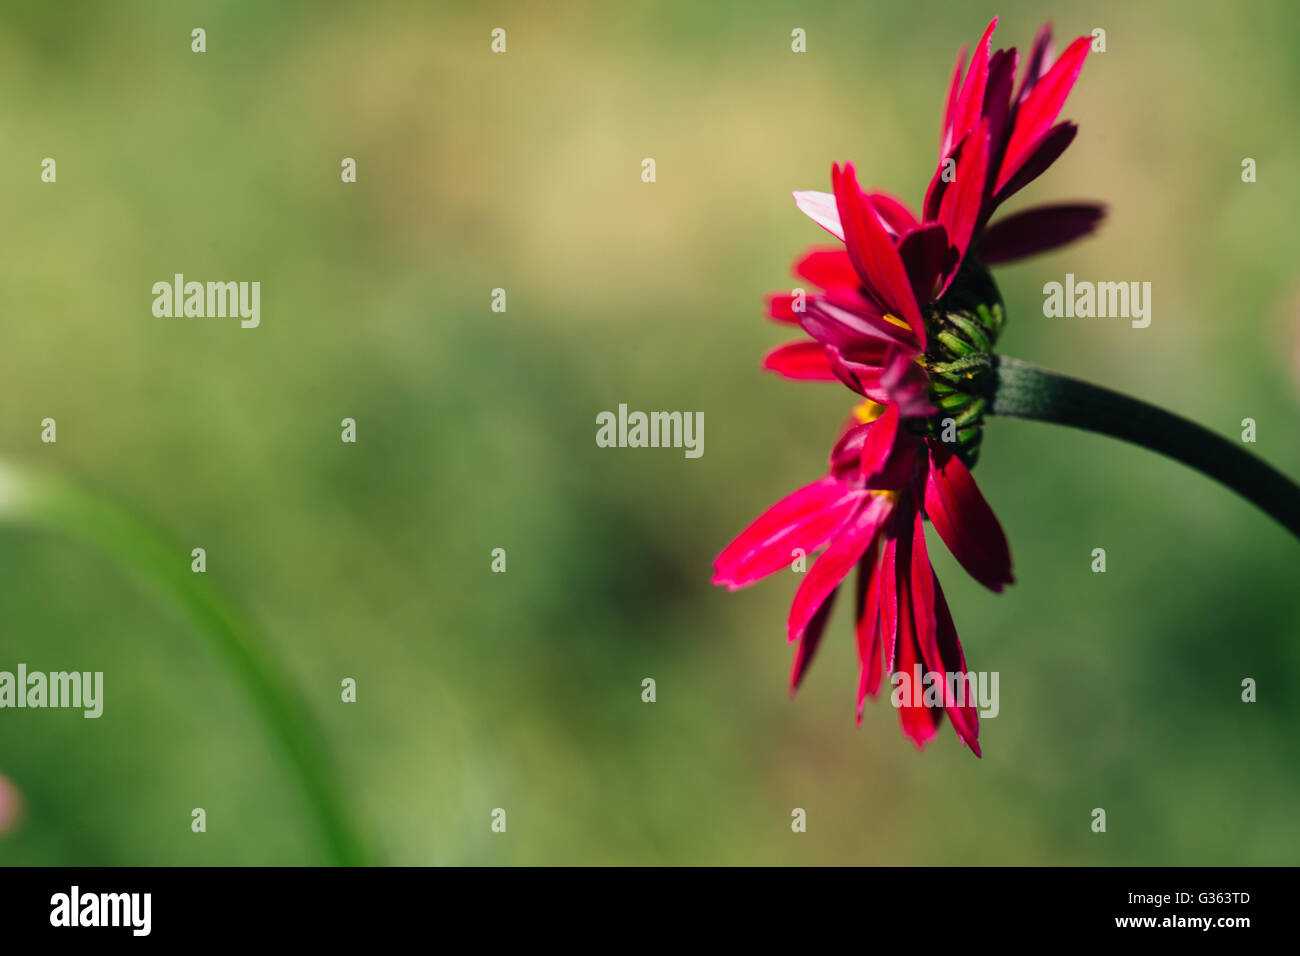 Decorative red daisy flower on a green background. Stock Photo